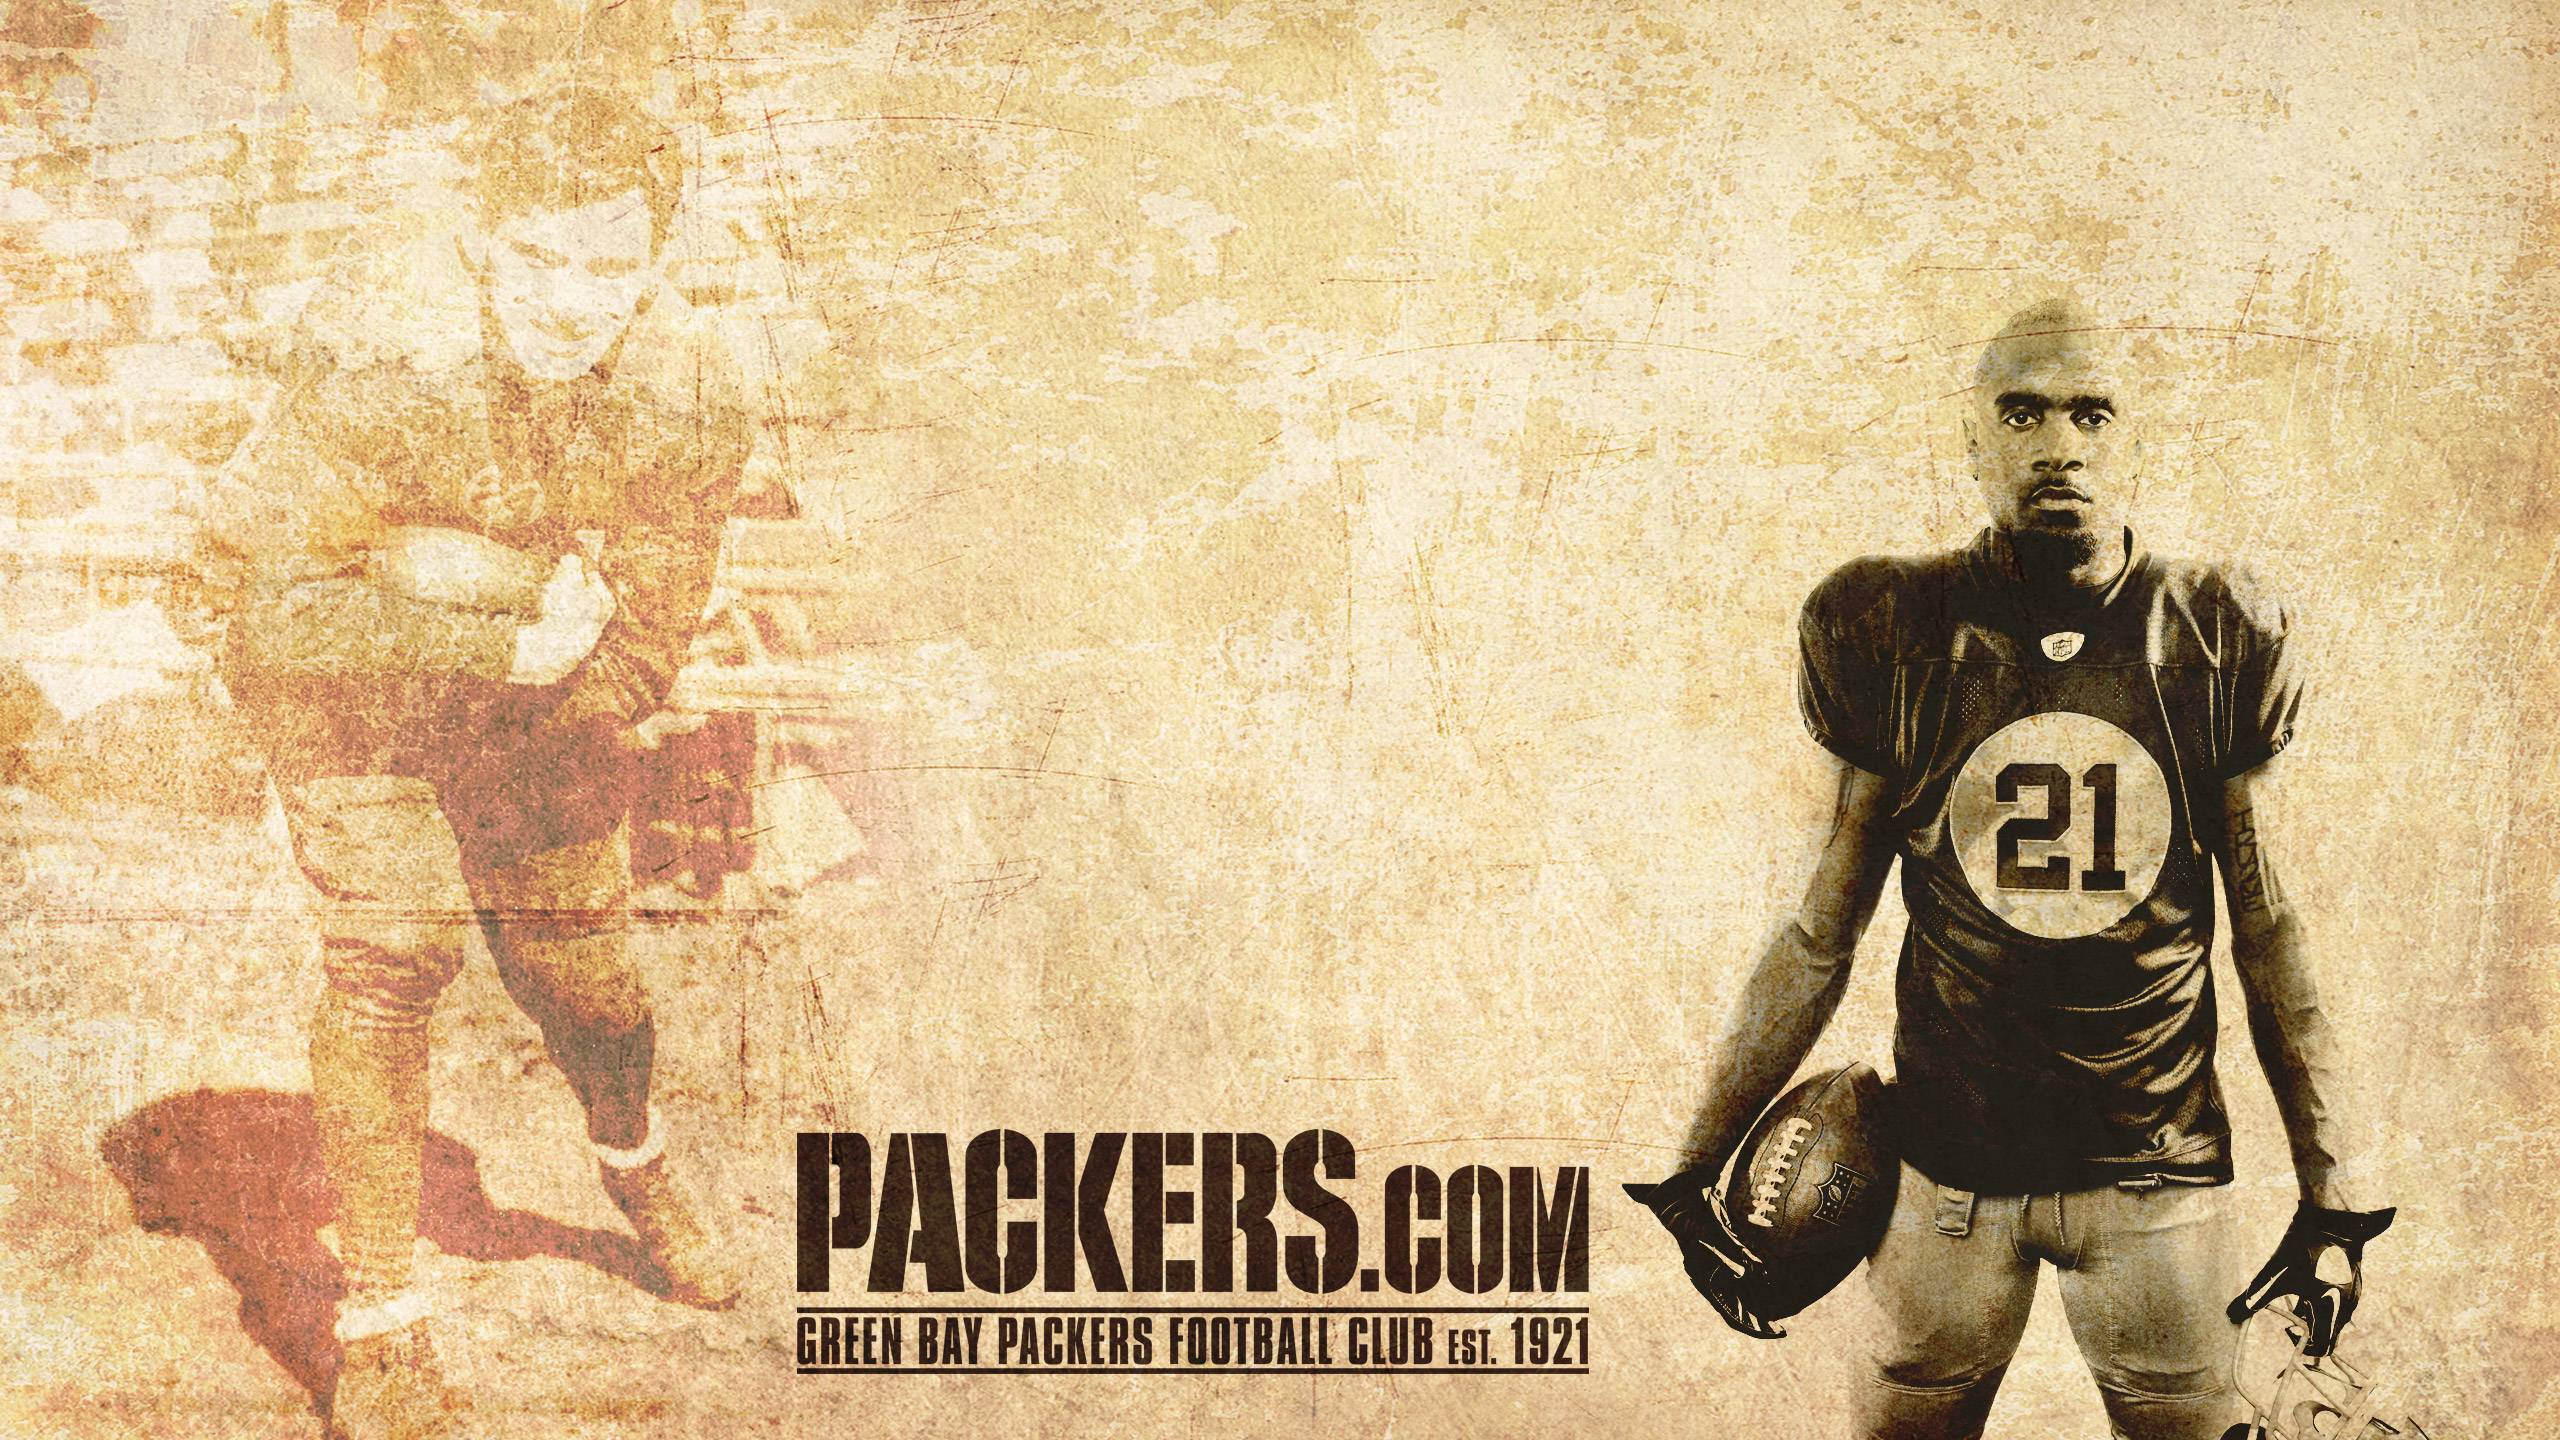 Packers.com. Wallpaper: 2010 Miscellaneous